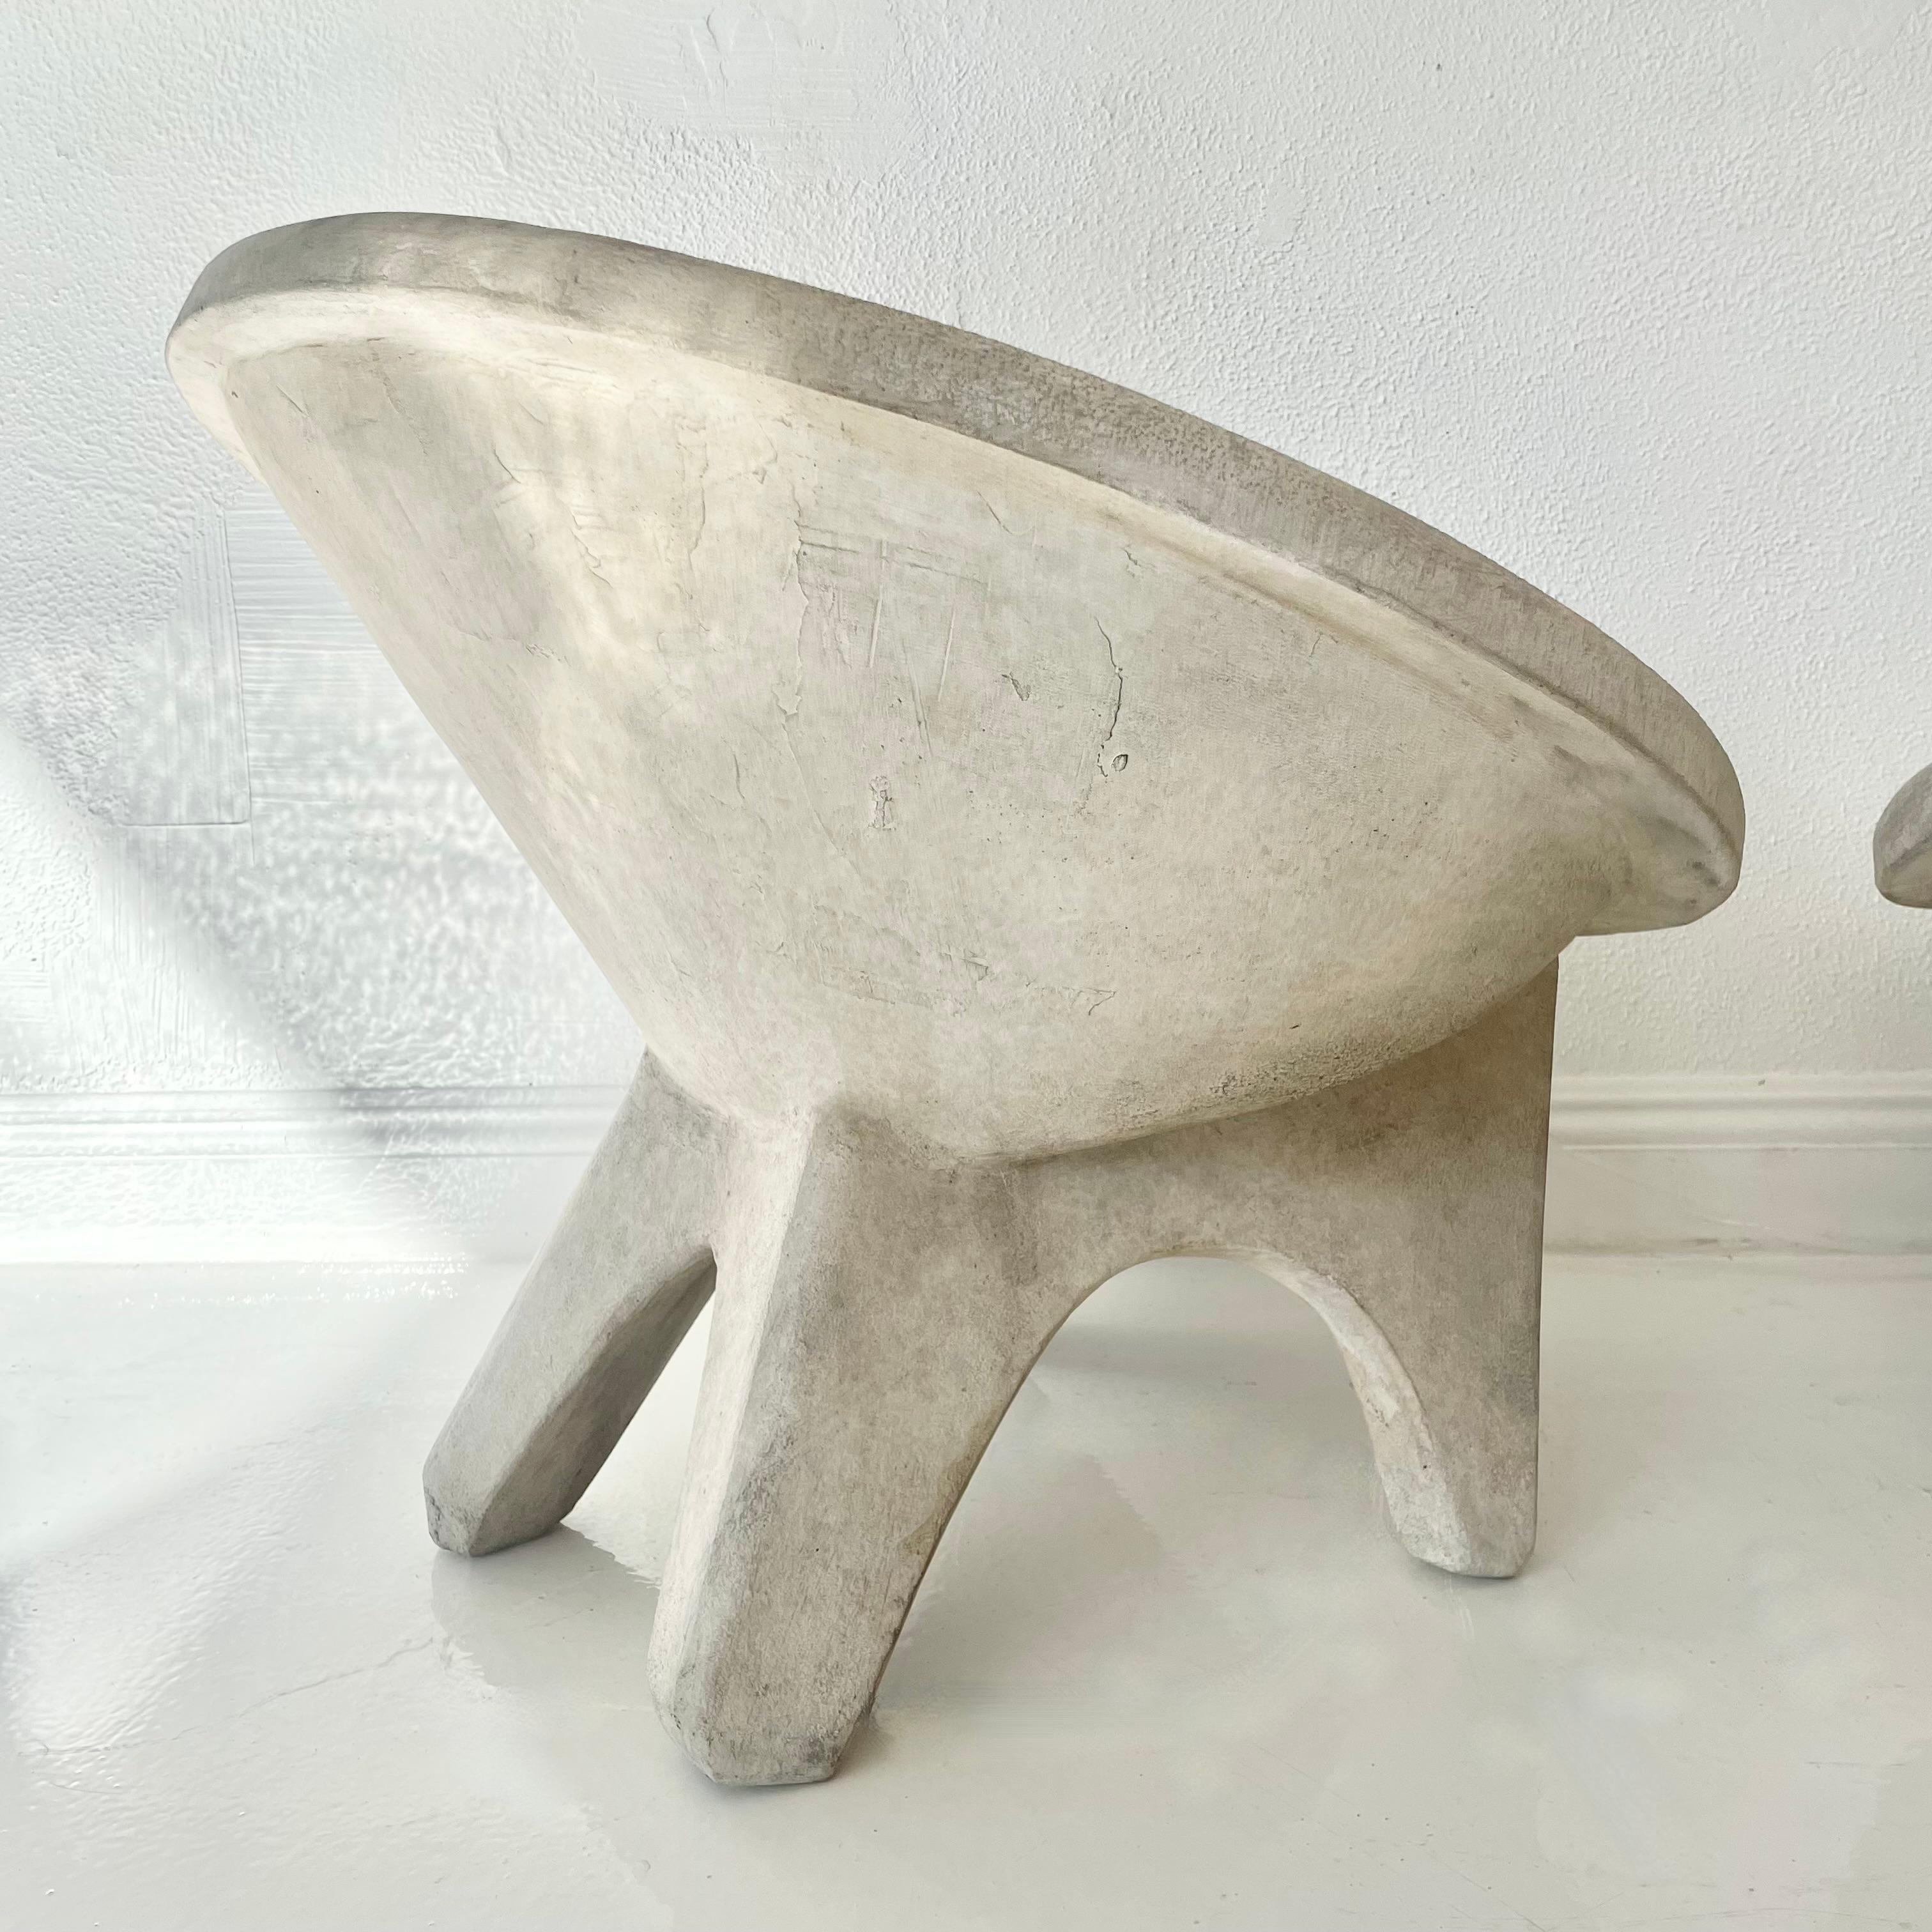 Pair of Sculptural Concrete Chairs by Merit Los Angeles For Sale 4